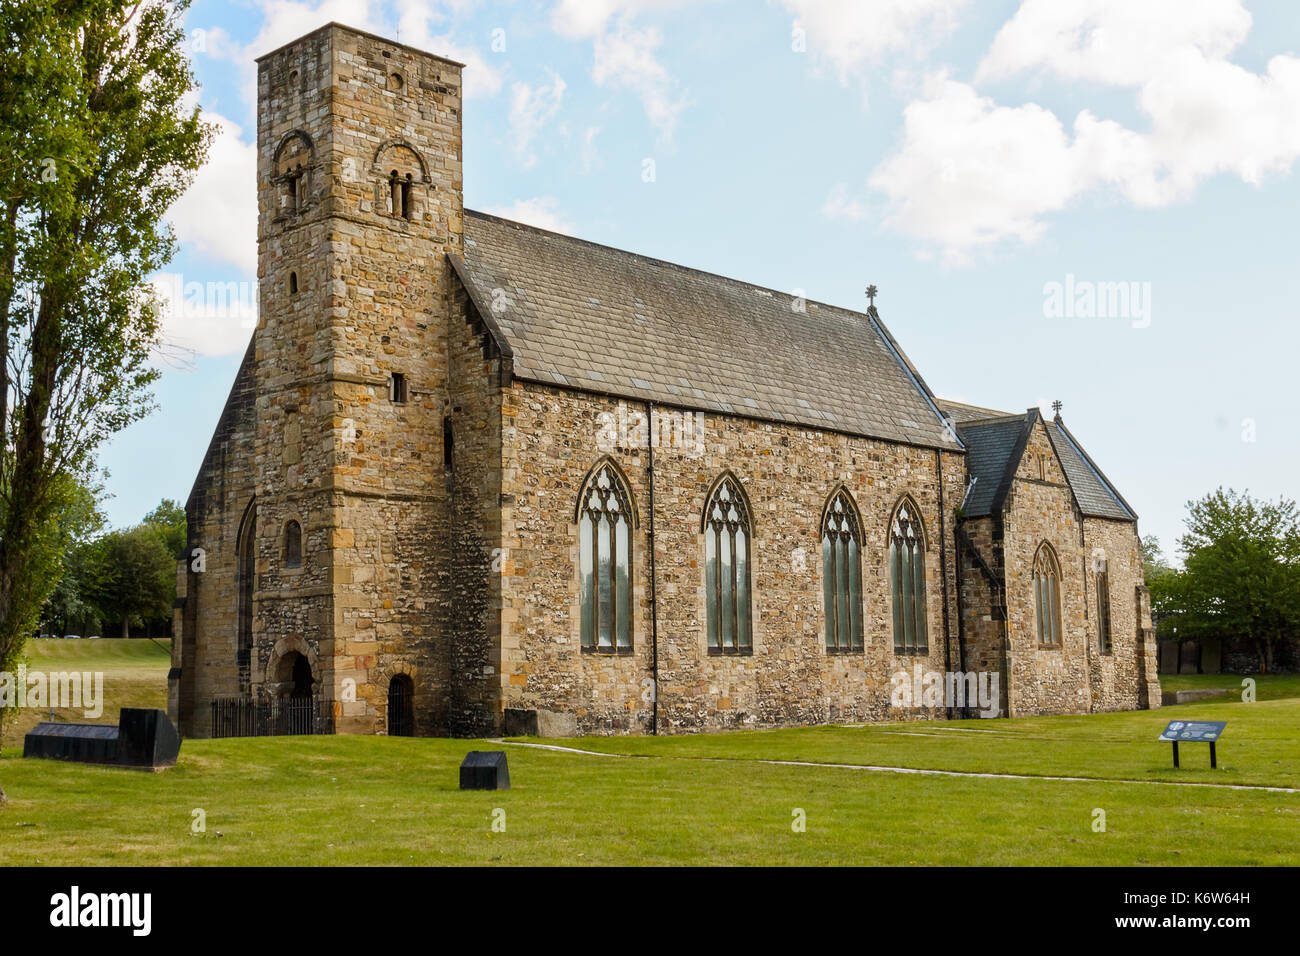 Anglo-saxon chiesa in Sunderland Foto Stock